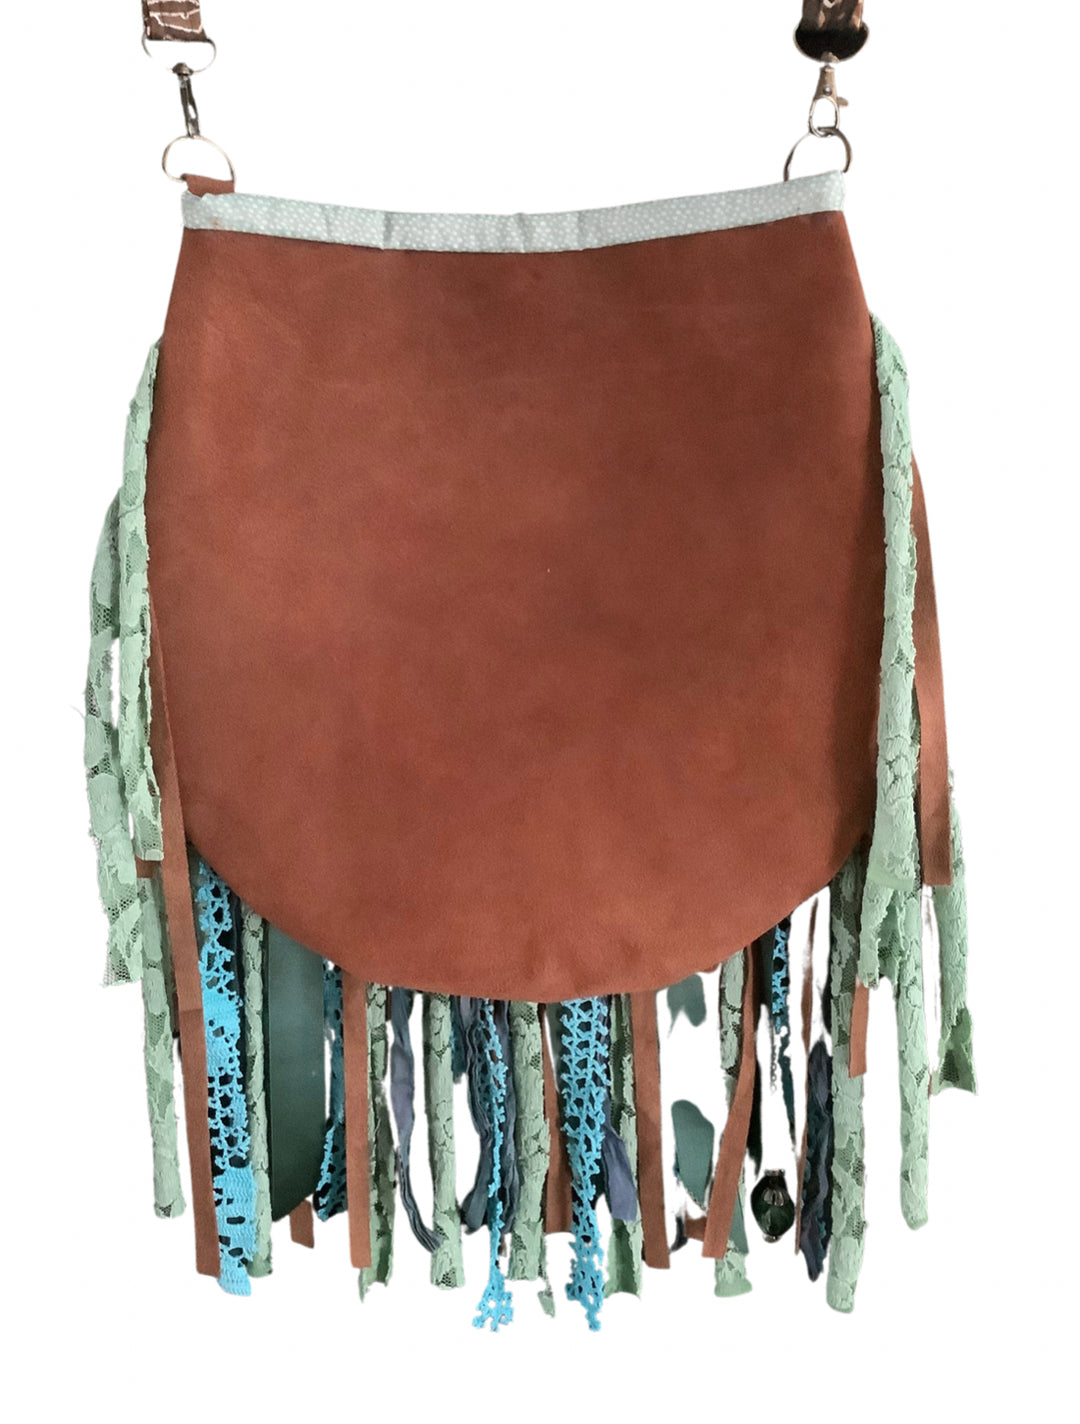 One-of-a-Kind Leather Boho Bag with Adjustable Strap